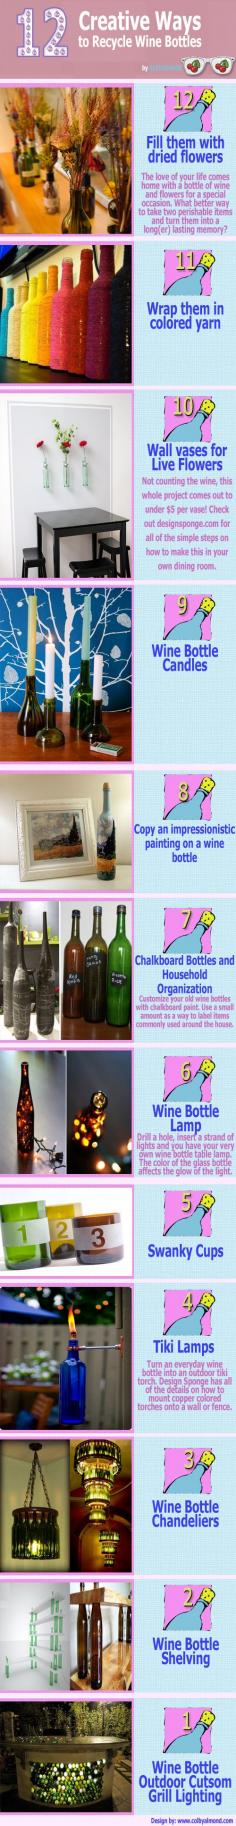 12 creative things to do with recycled wine bottle